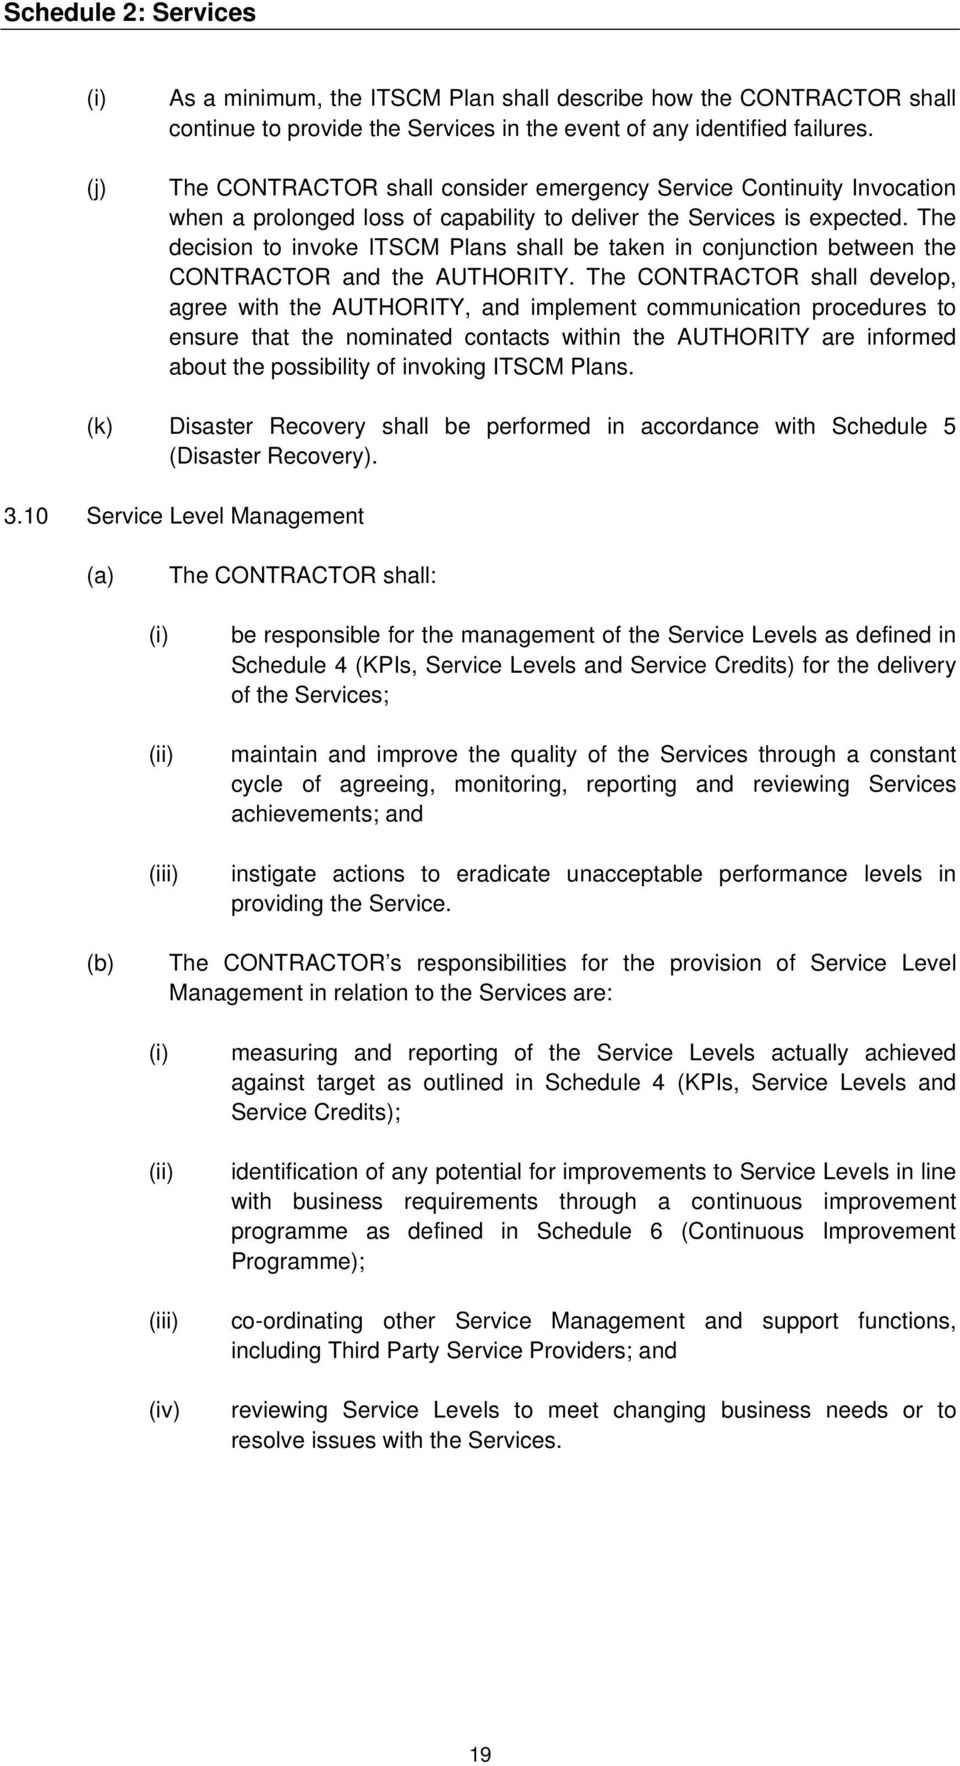 The decision to invoke ITSCM Plans shall be taken in conjunction between the CONTRACTOR and the AUTHORITY.